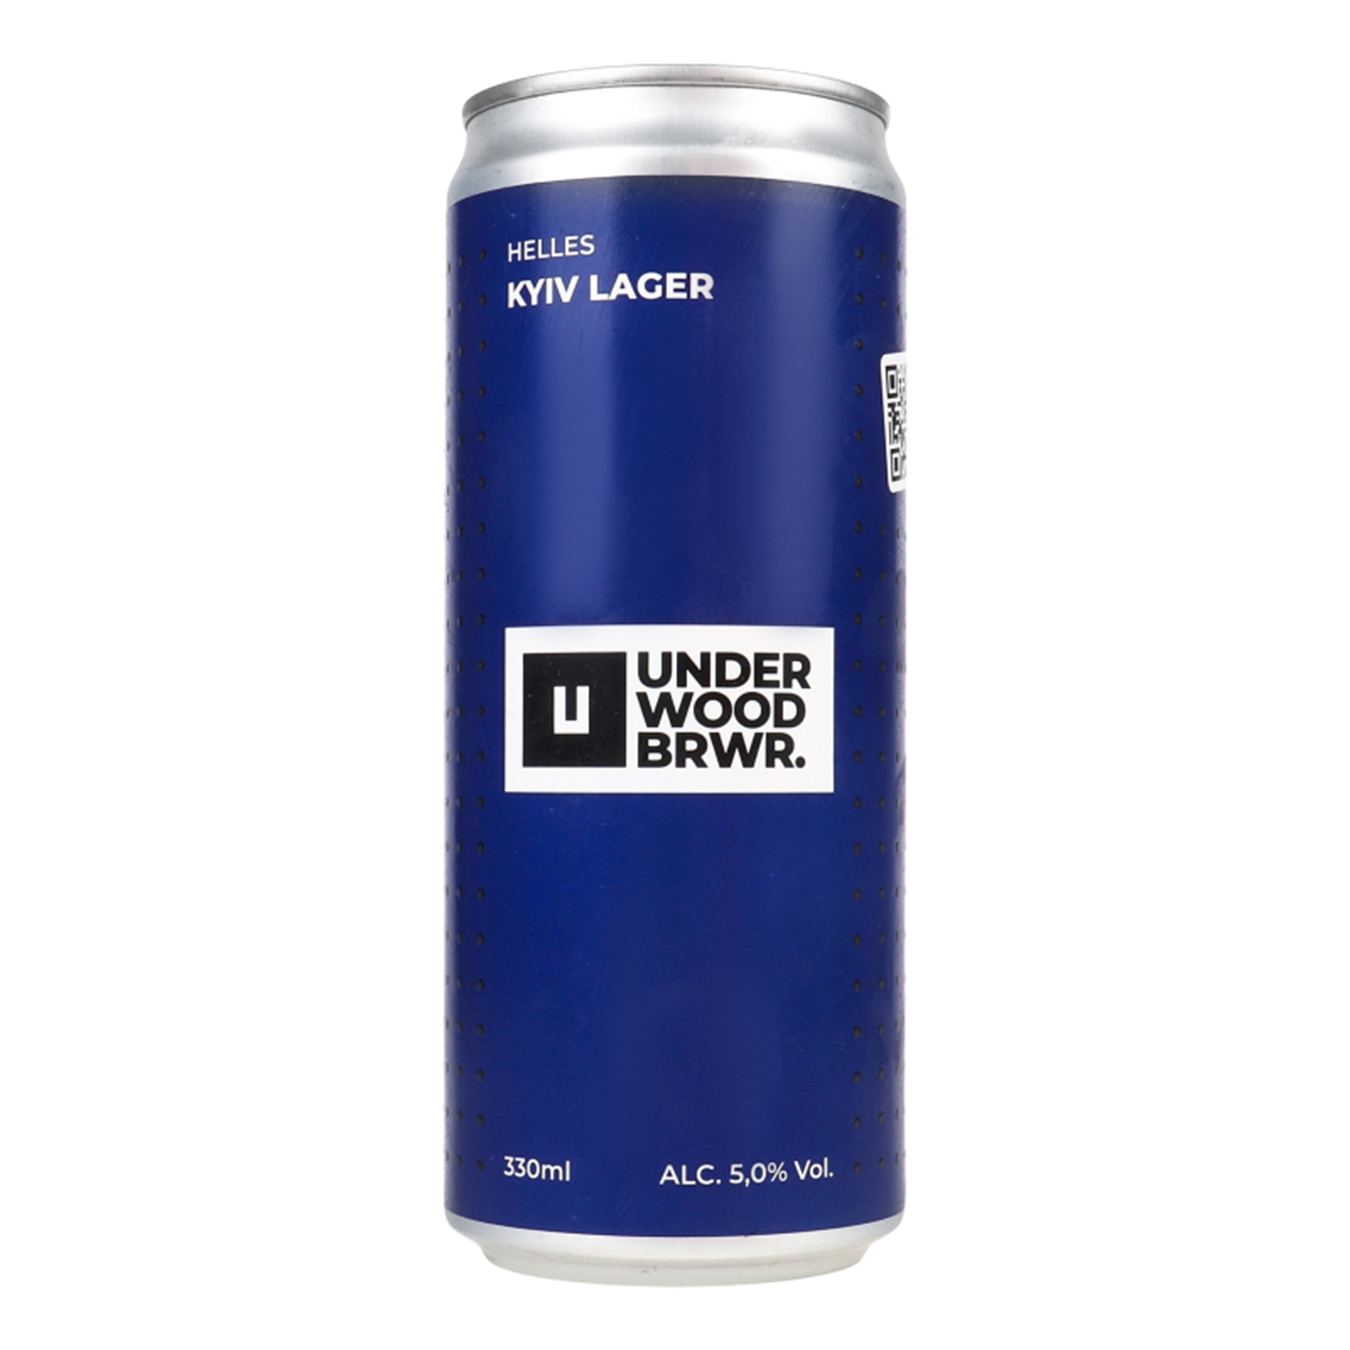 Light beer Underwood BREWERY Kyiv Lager 5% 0.33l iron can